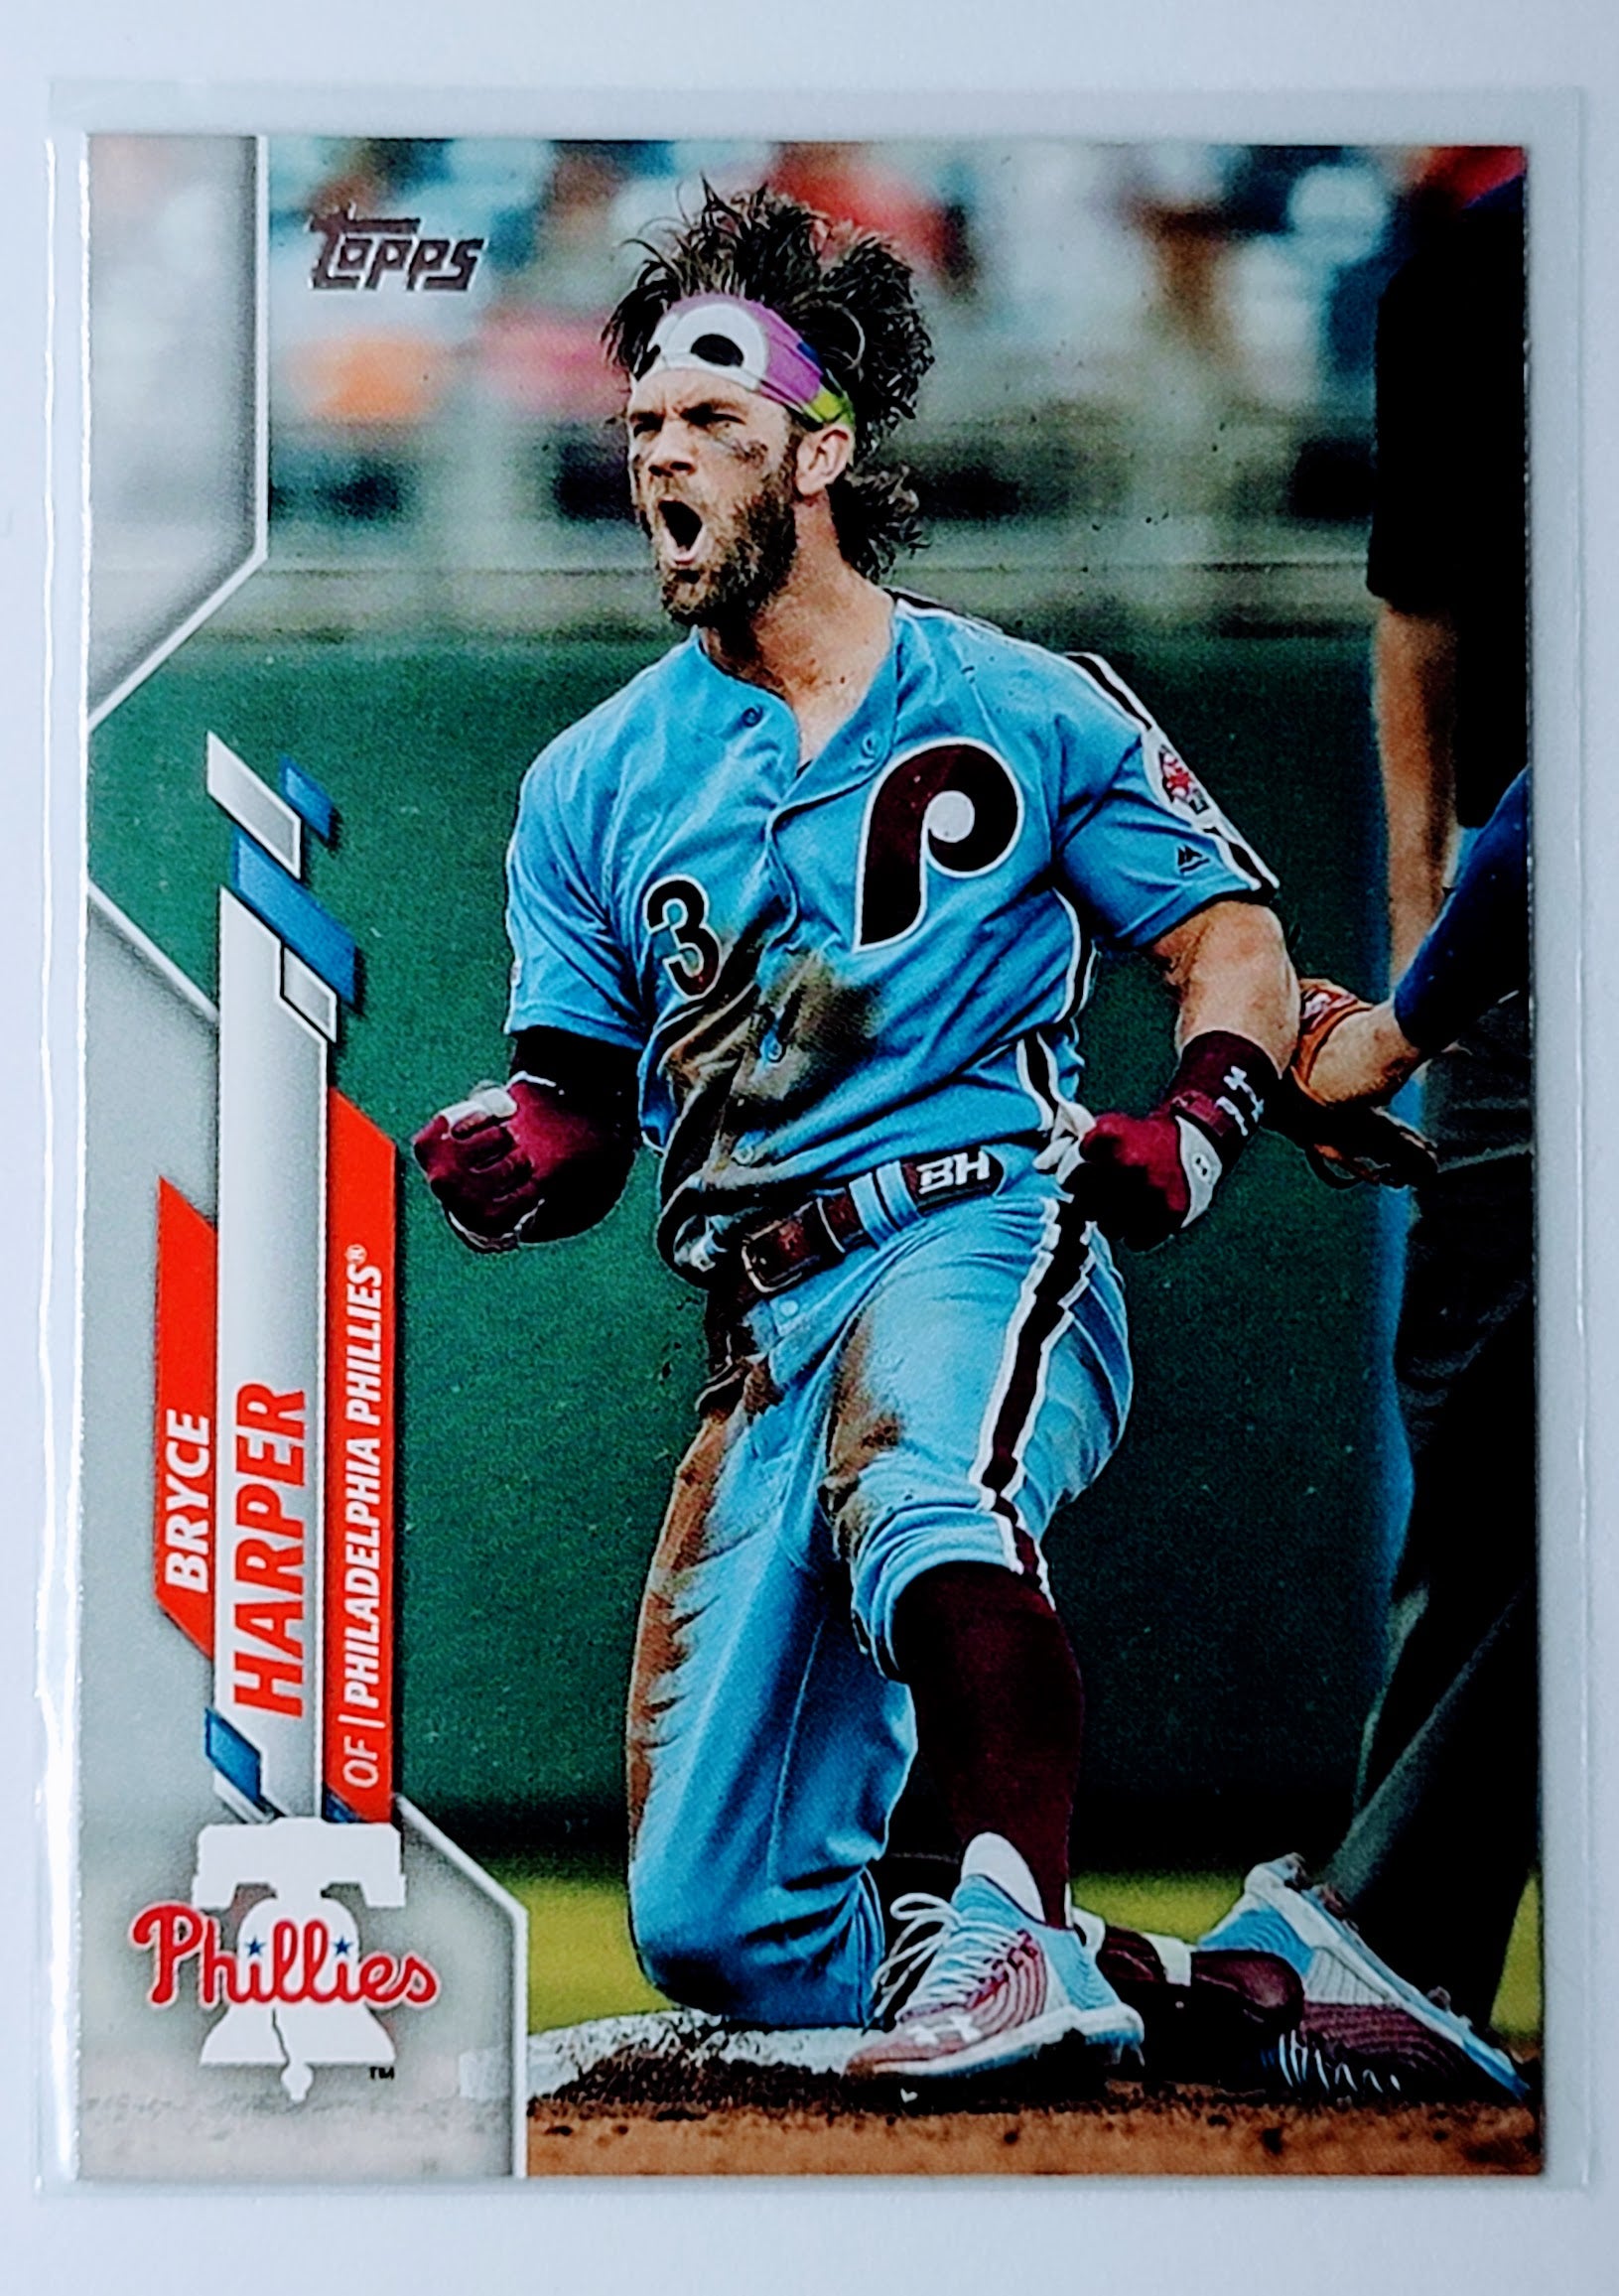 2020 Topps Bryce Harper   Philadelphia Phillies Baseball Card  TH1CB simple Xclusive Collectibles   